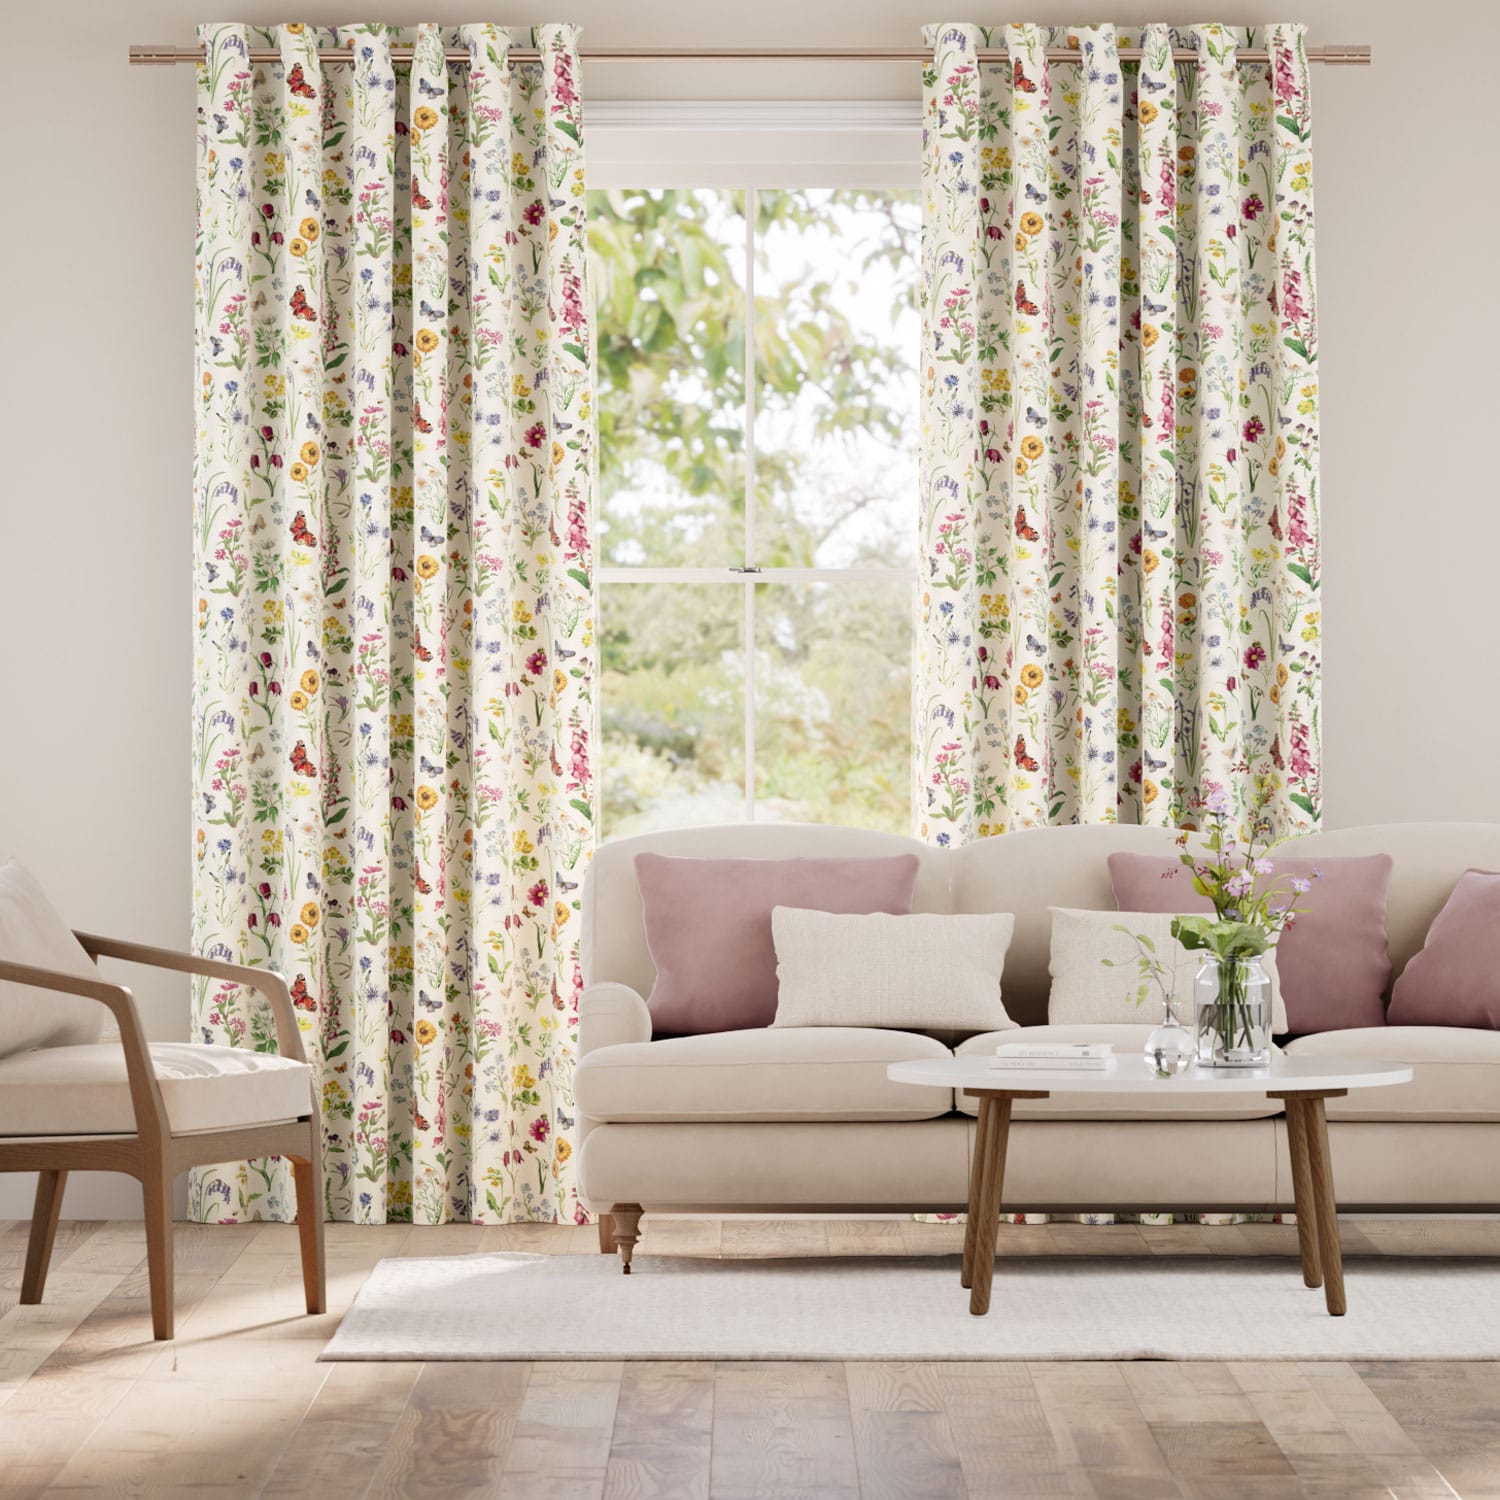 Wild Flowers Meadow Curtains thumbnail image